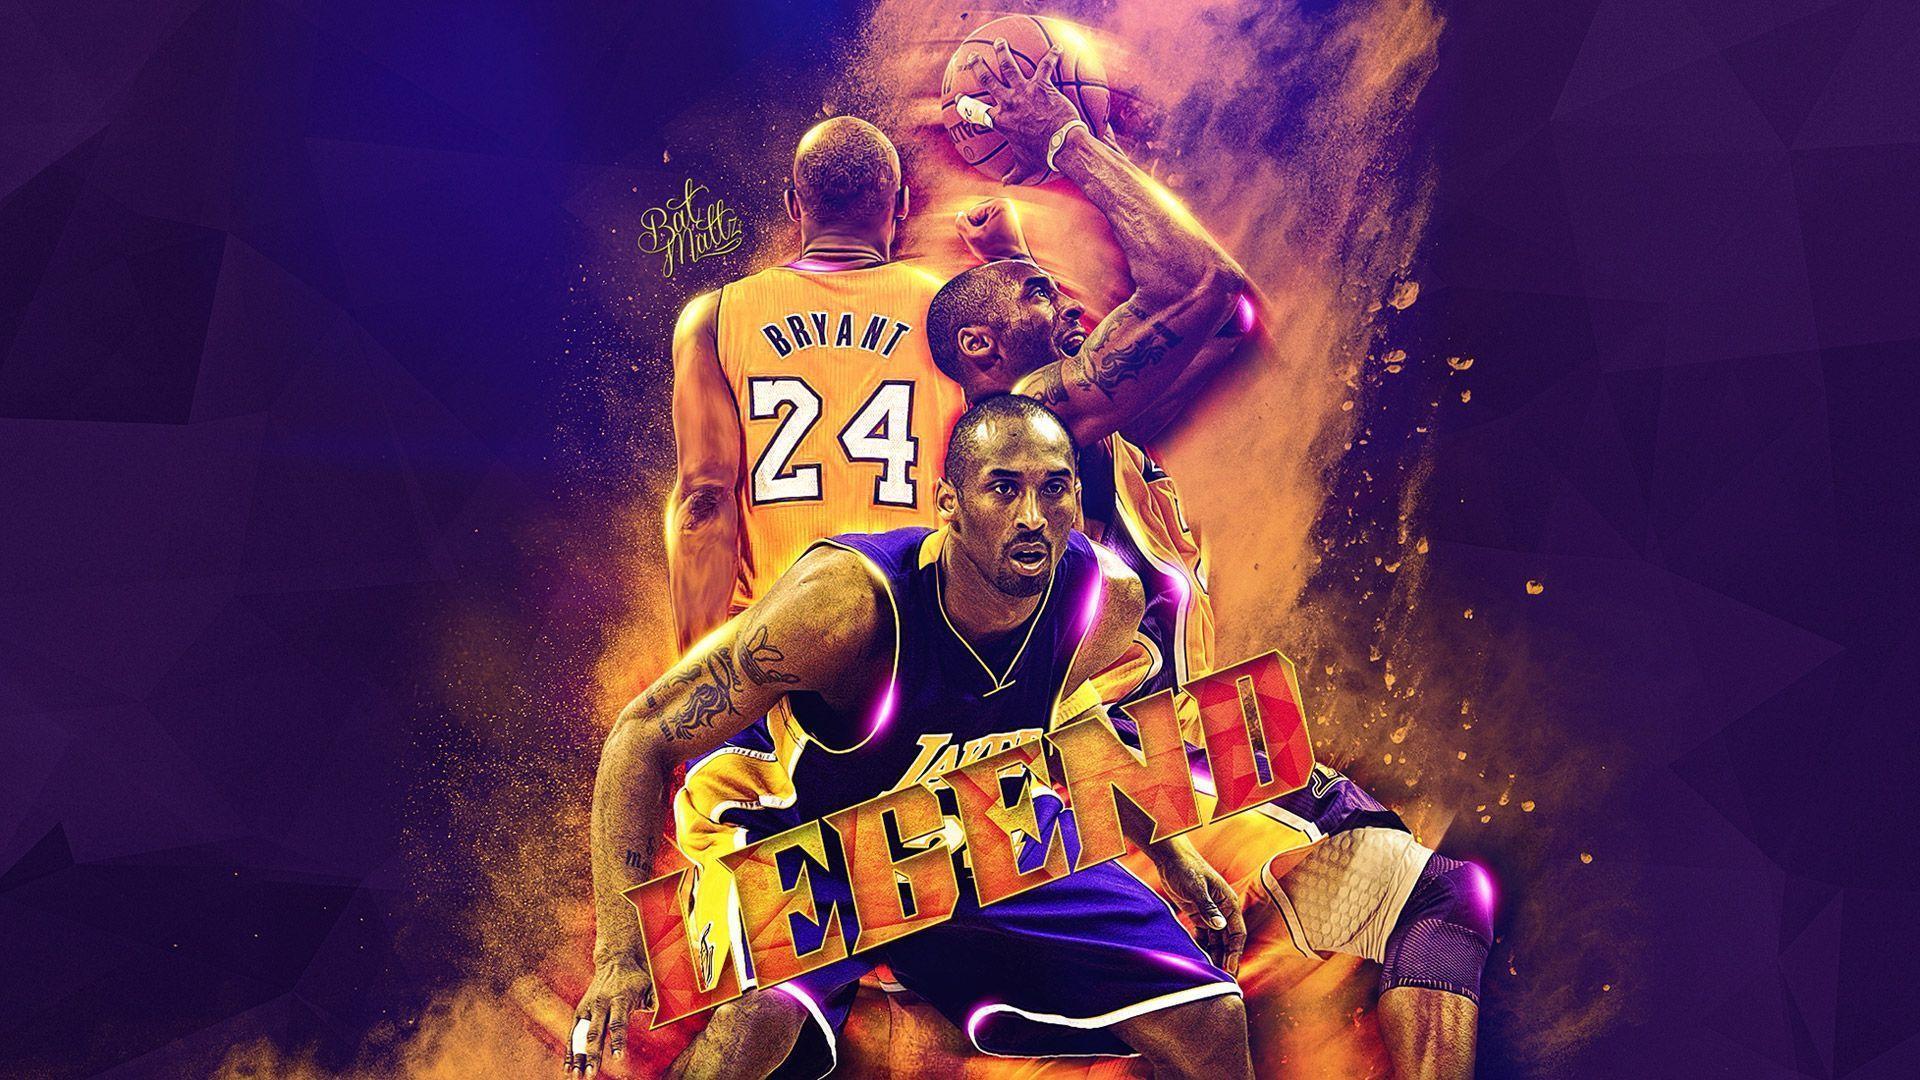 Kobe Bryant Wallpaper Discover more Background basketball cool Desktop  Iphone wallpapers httpswww  Kobe bryant wallpaper Kobe bryant Kobe  bryant quotes